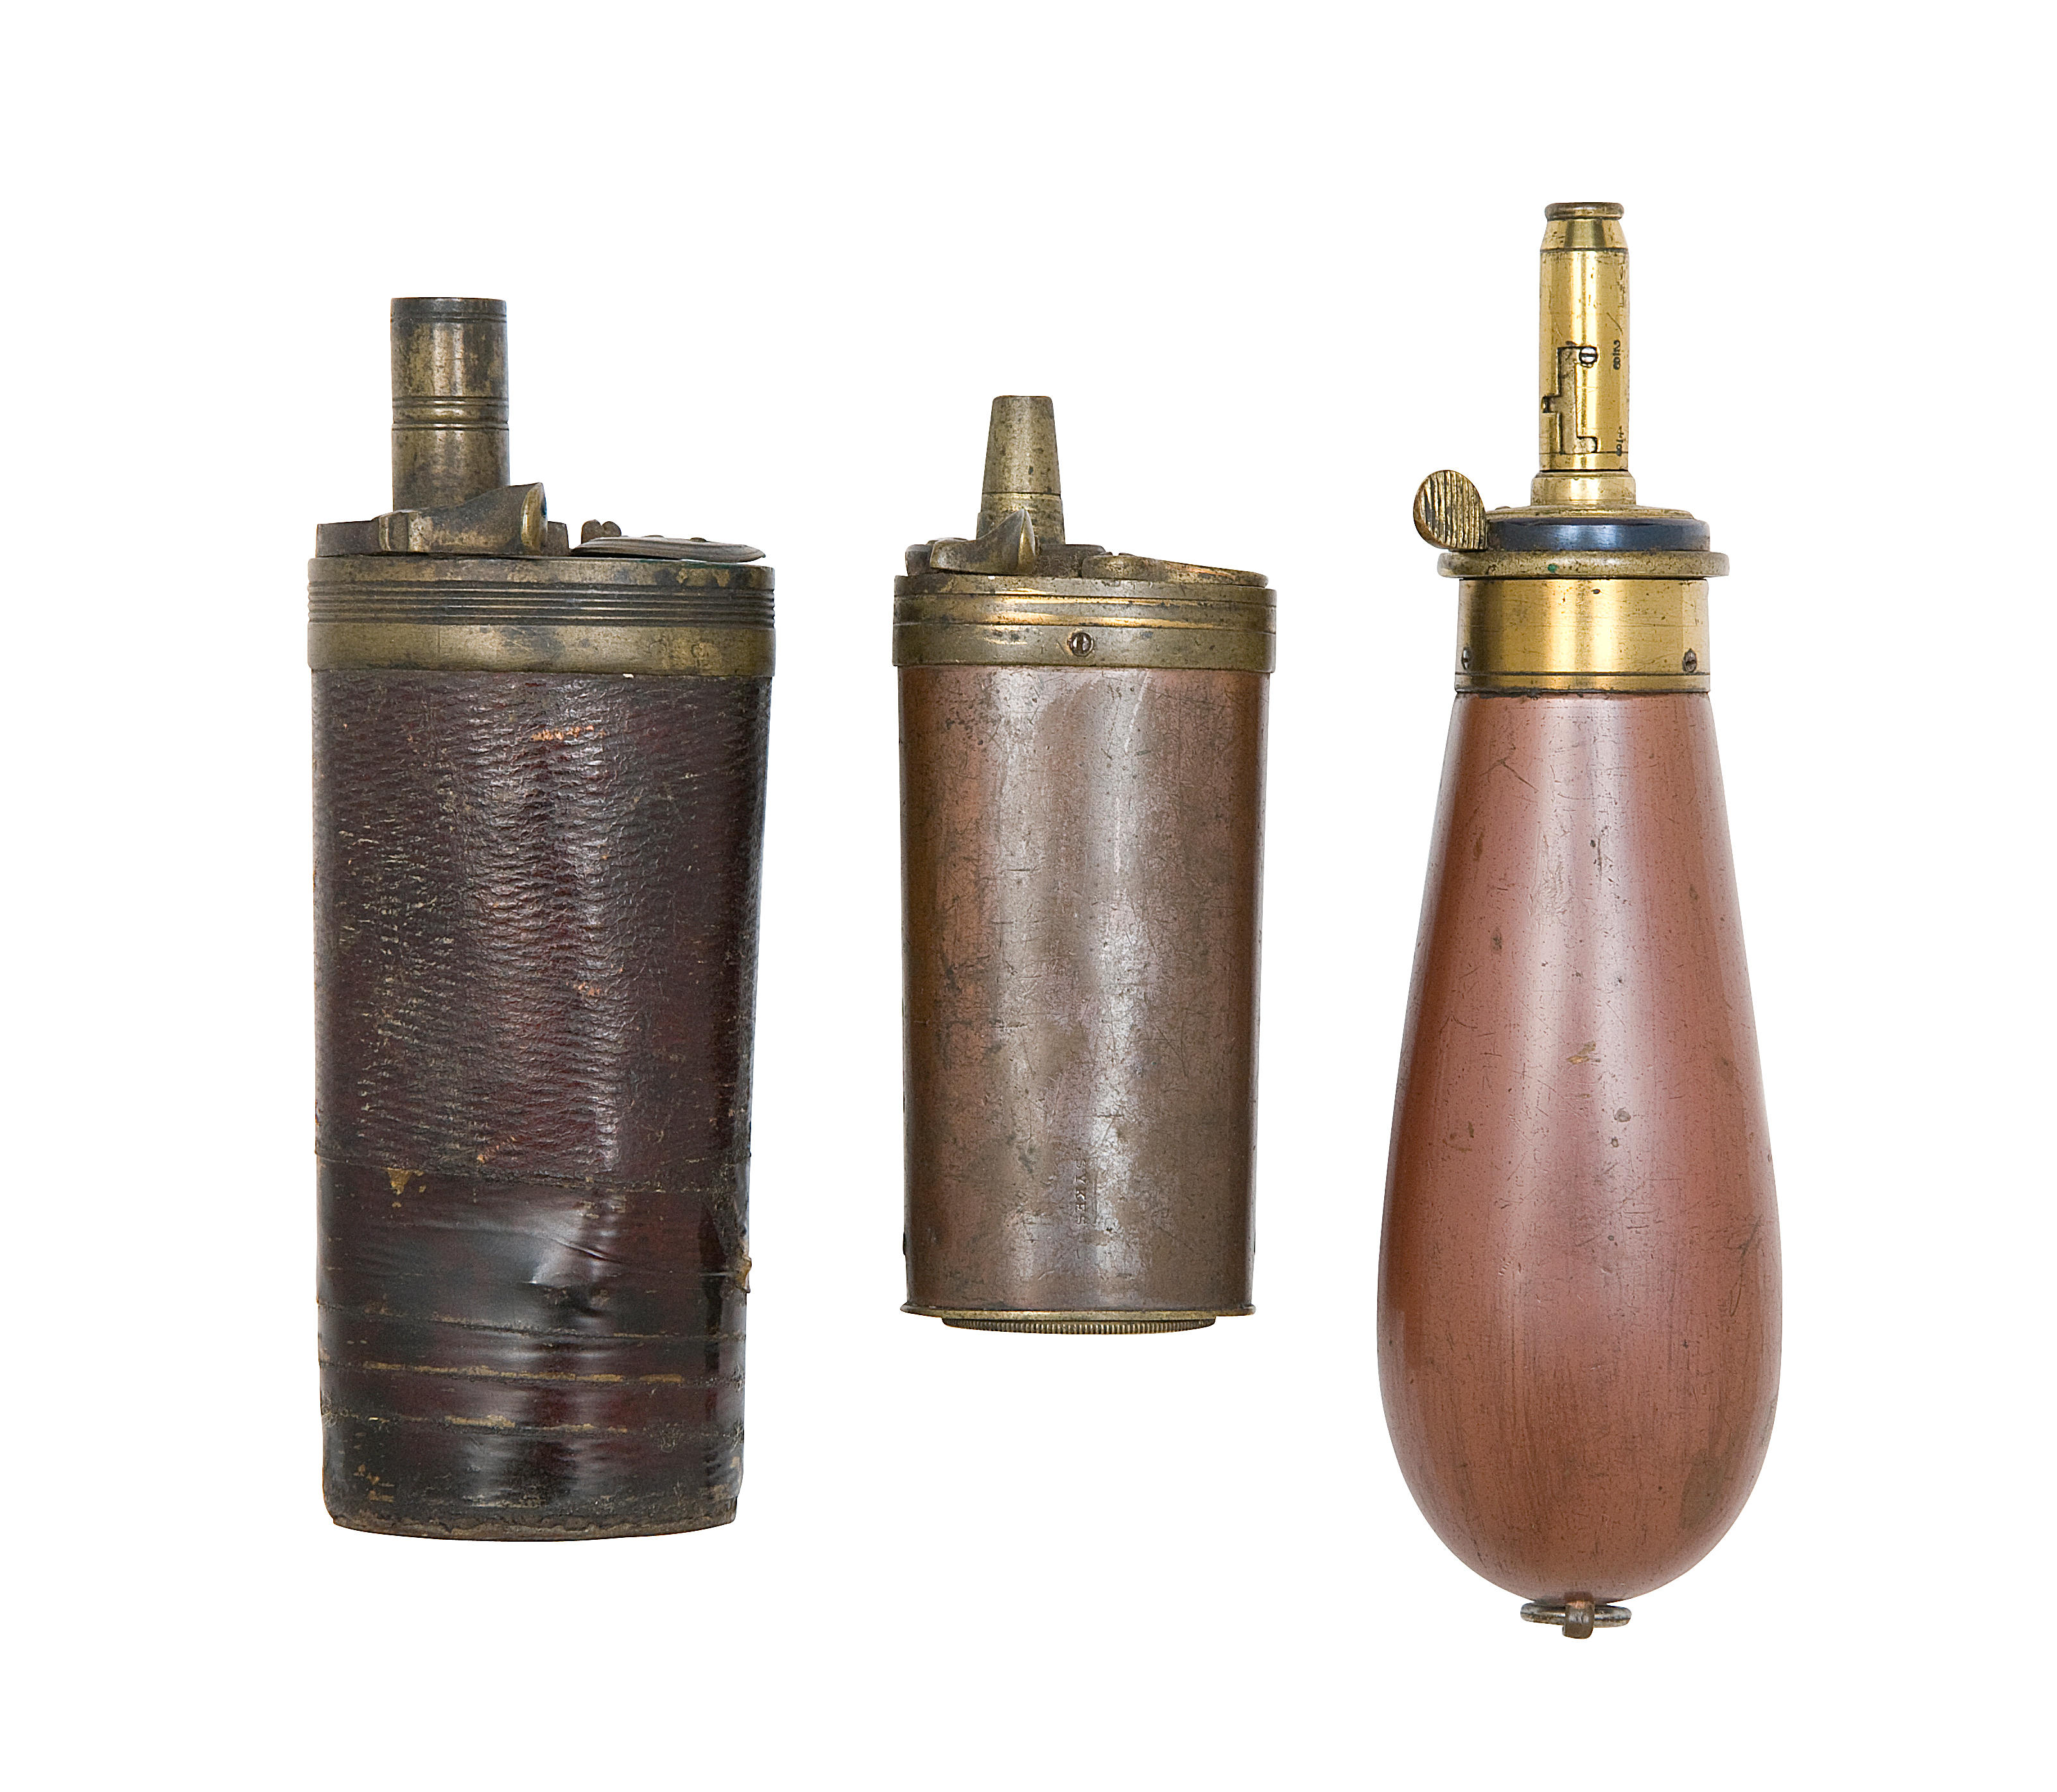 Powder Flask - real or repro?